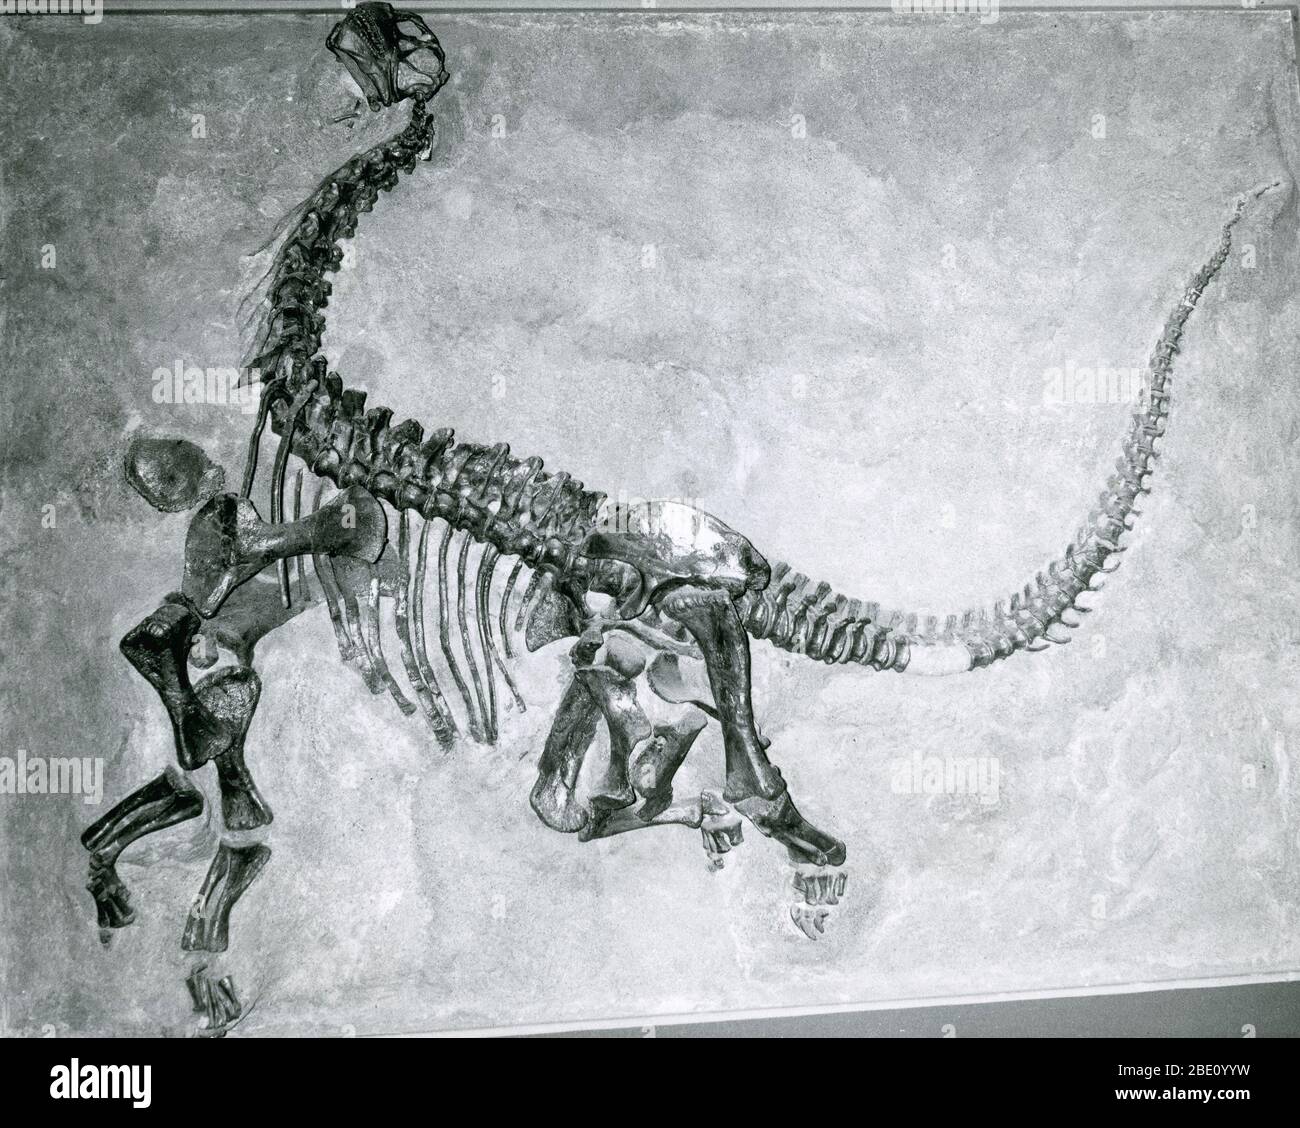 Skeleton of a young dinosaur.  Approximately 700 species of dinosaurs have been named. Dinosaurs lived during the Mesozoic Era, which includes the Triassic, Jurassic, and Cretaceous Periods. Their extinction can be attributed to a meteorite impact, release of volcanic gases, climate cooling, sea-level change, low reproduction rates, poisonous gases from a comet, and changes in the Earth's orbit or magnetic field. Stock Photo